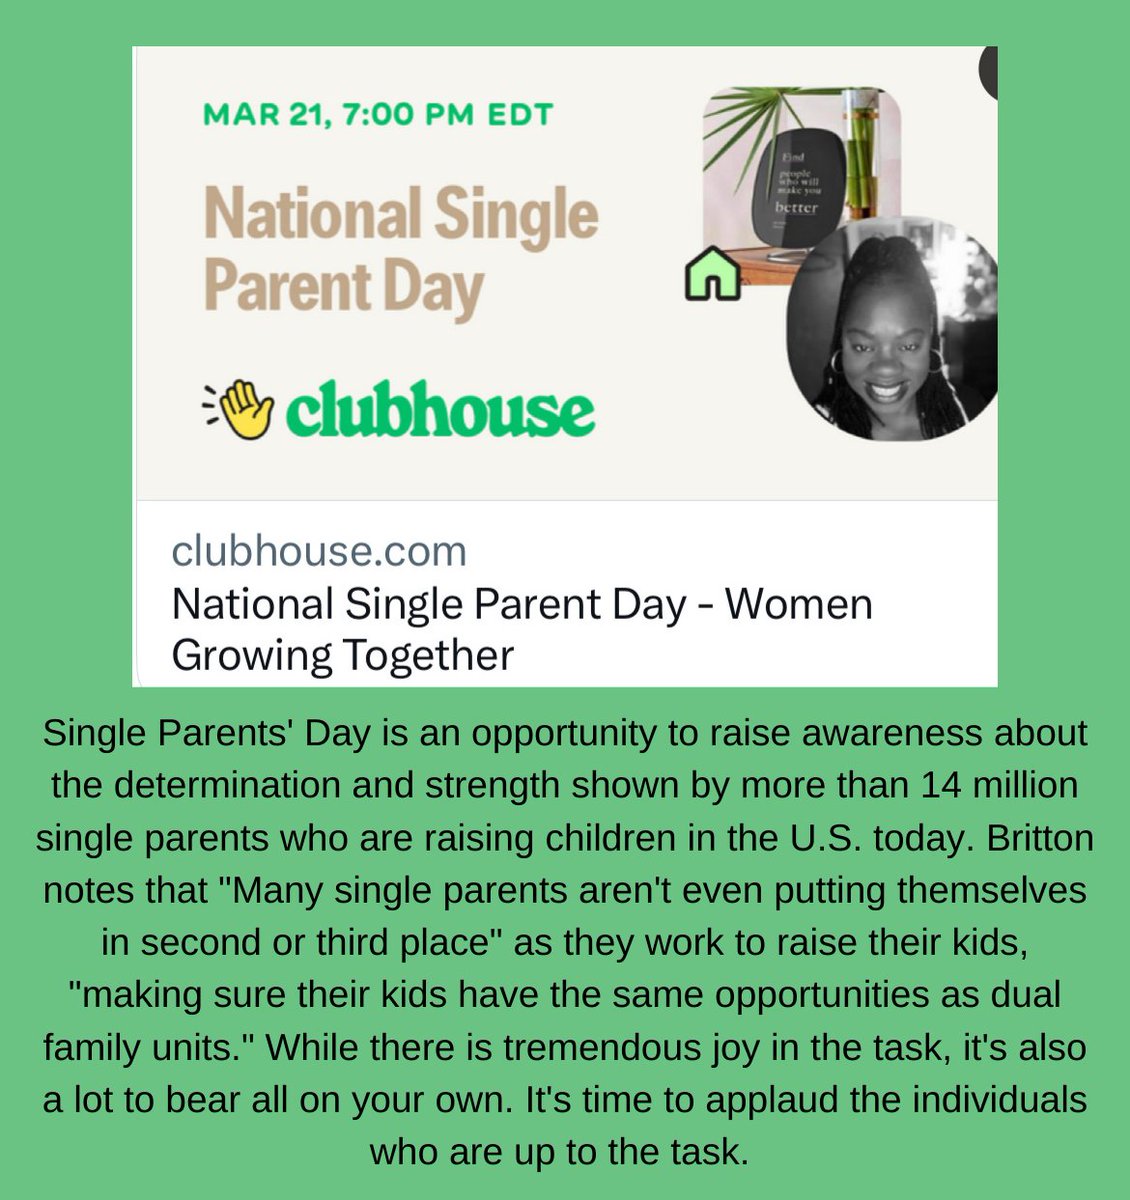 Join Sharper Office Admin as we celebrate National Single Parent Day and the individuals who stood up for the task to raise our next generation. 

#SingleParentDay#
#SingleMother#
#SharperOfficeAdminBoss#